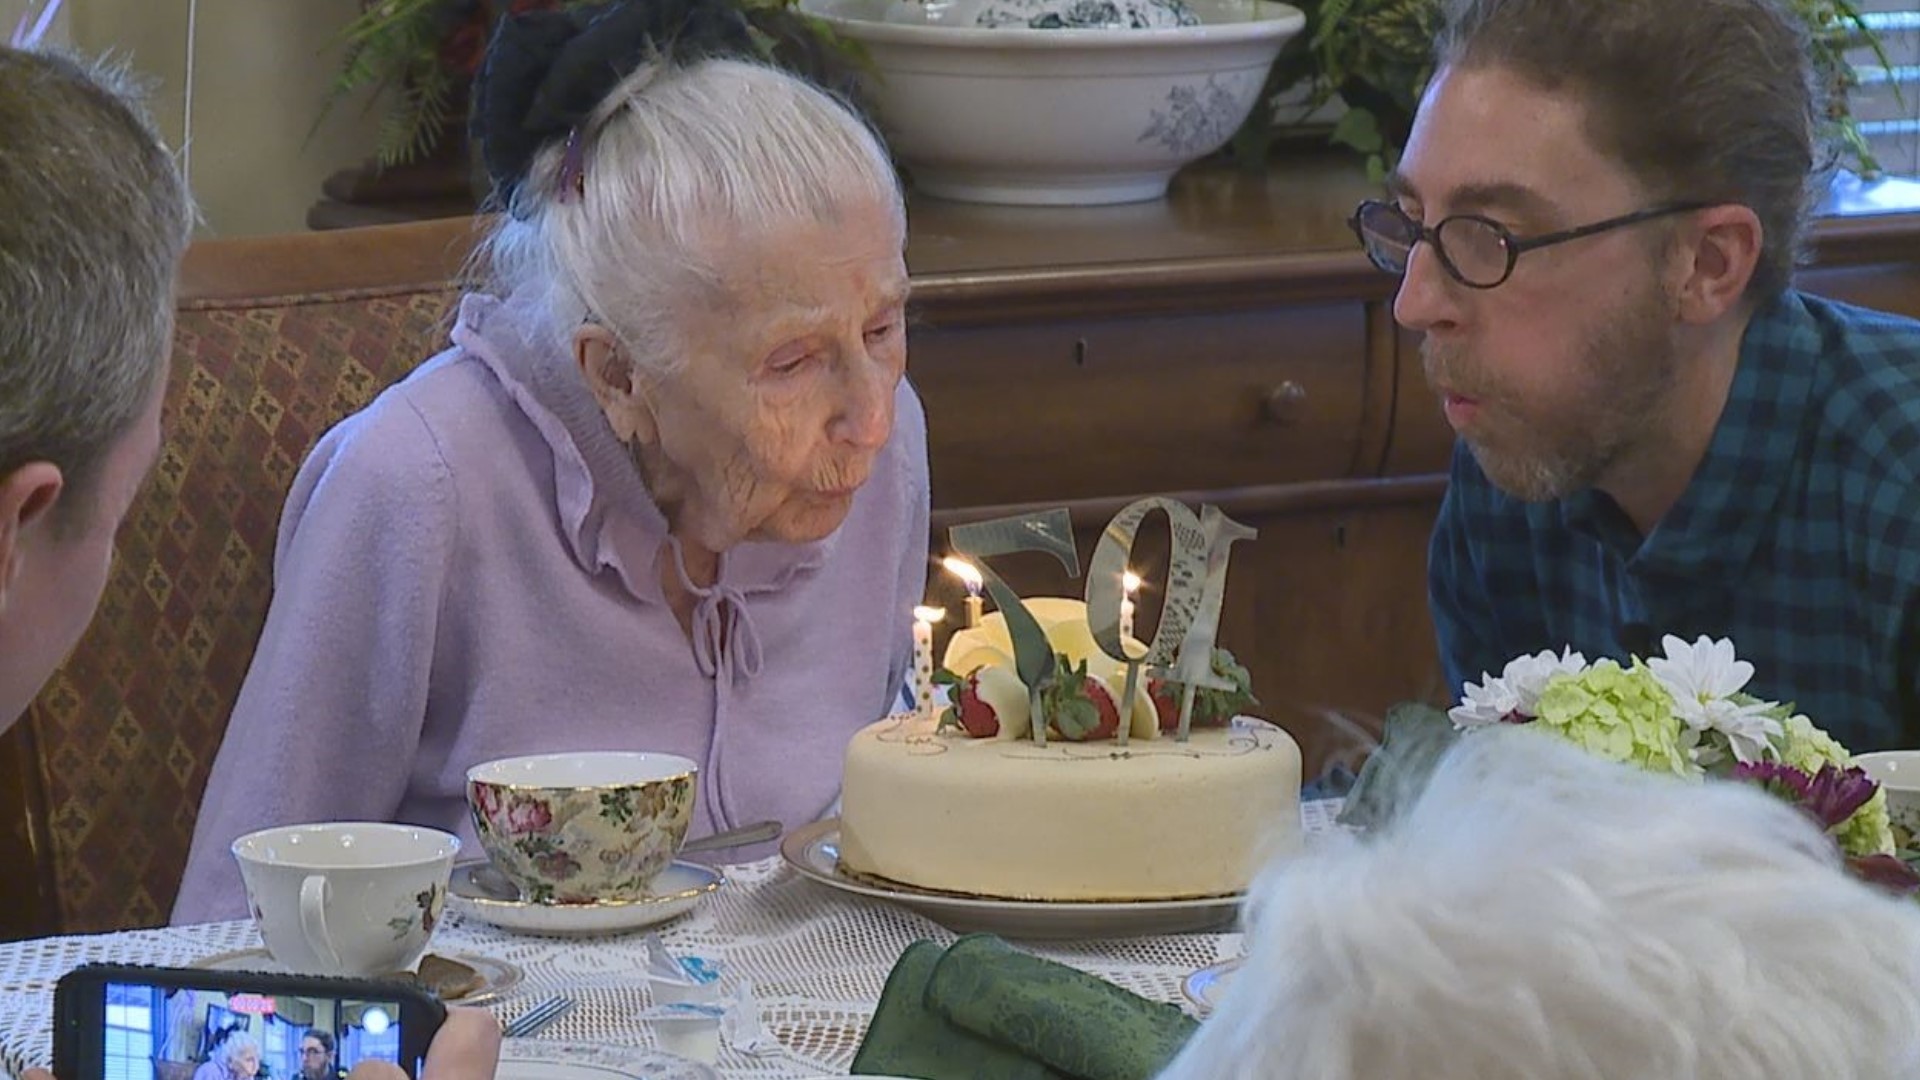 A tea party was held to celebrate Jean Stevens' special day. Both she and her grandson say they're very appreciative of today's efforts to celebrate another year.